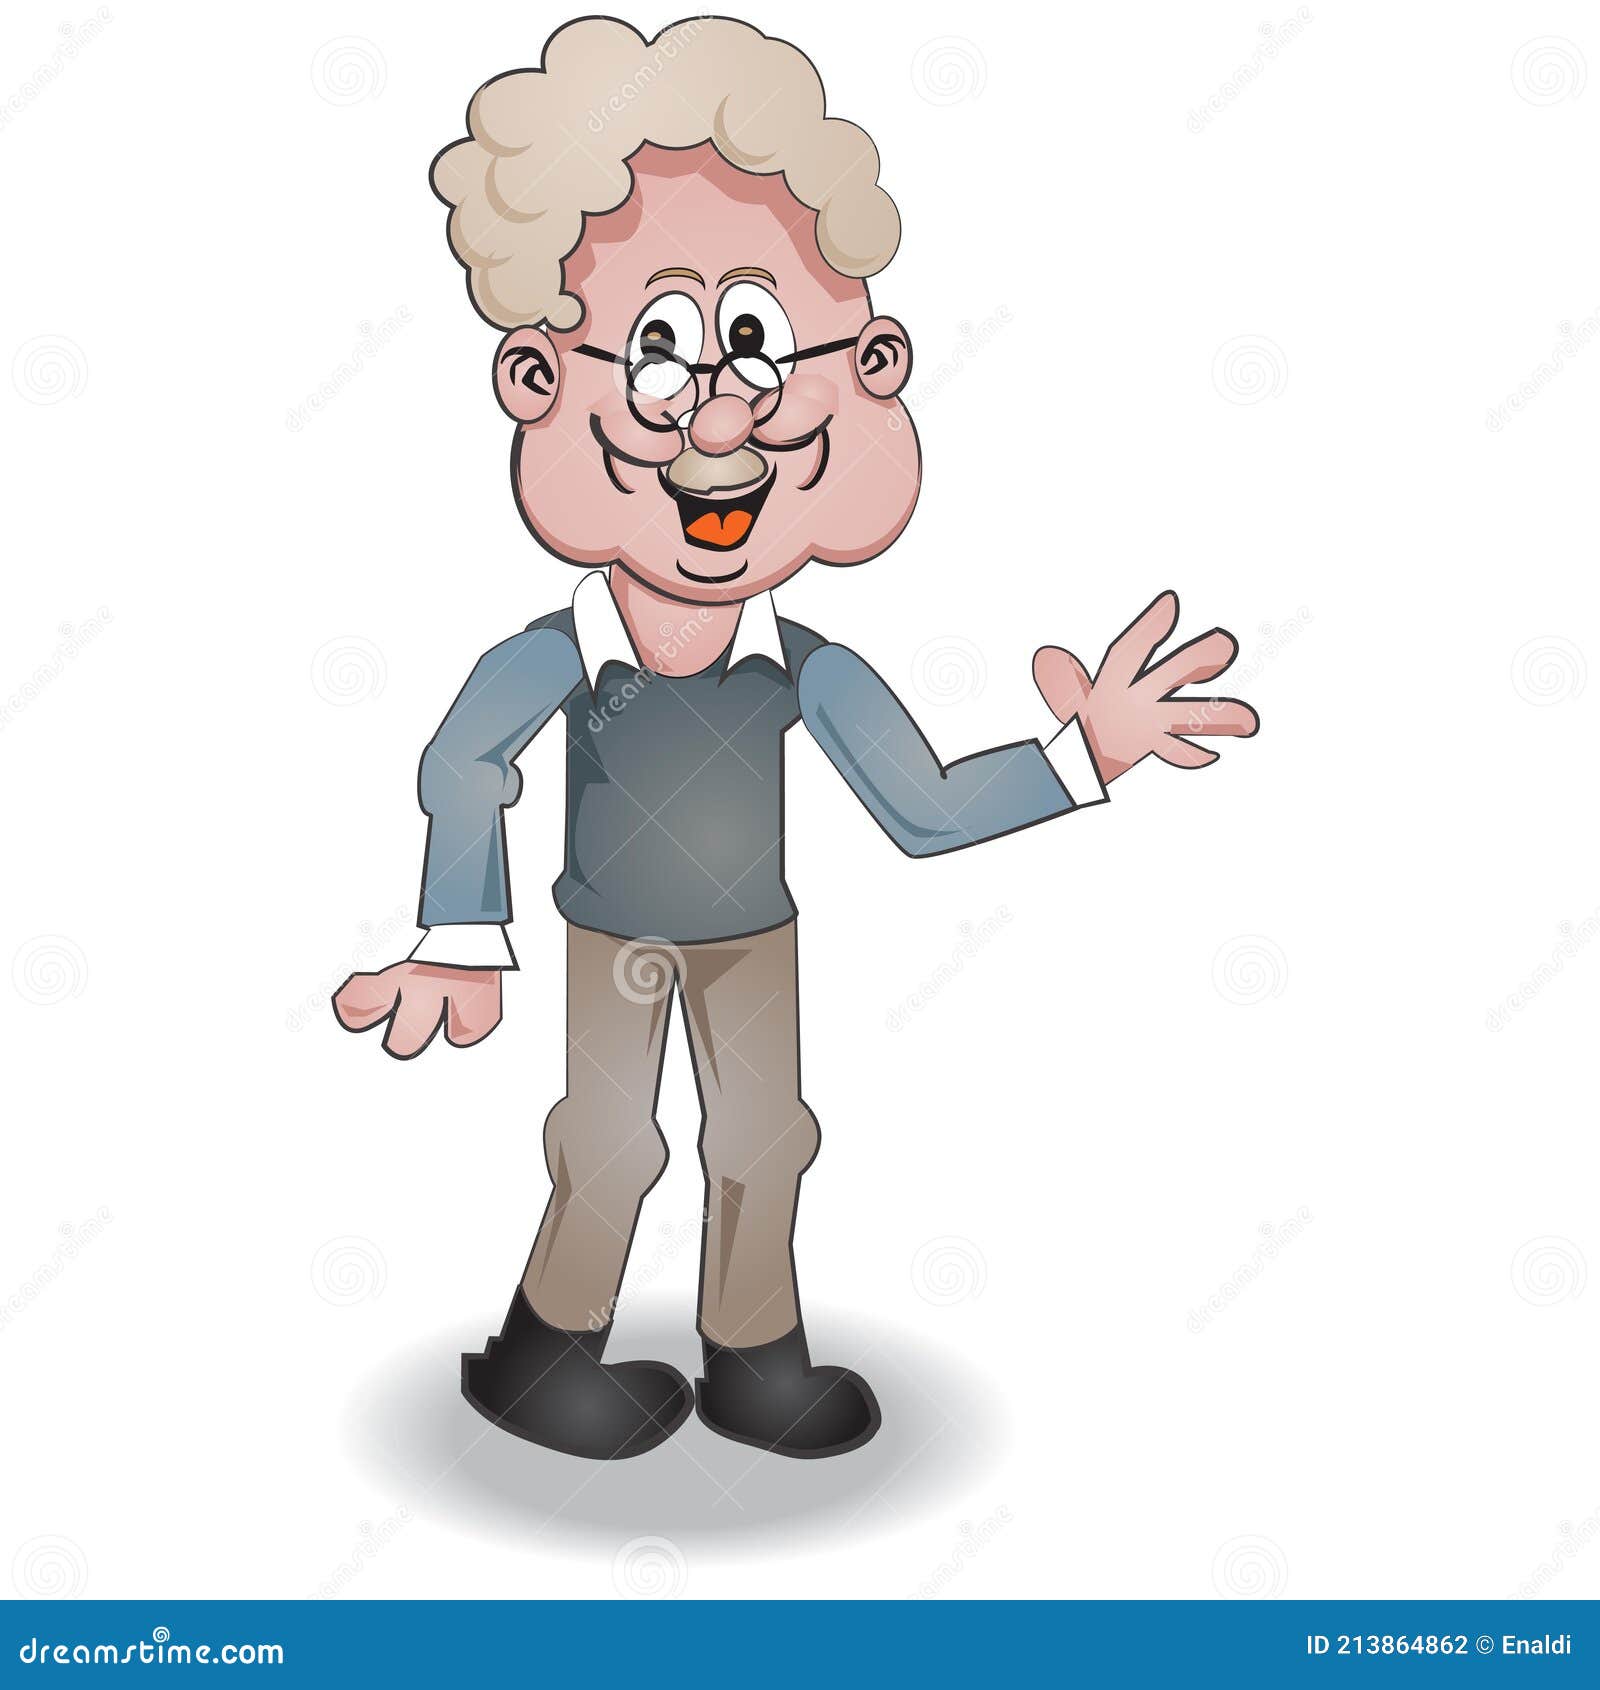 Grandpa Cartoon Character and Illustration Stock Vector - Illustration of  graphic, drawing: 213864862